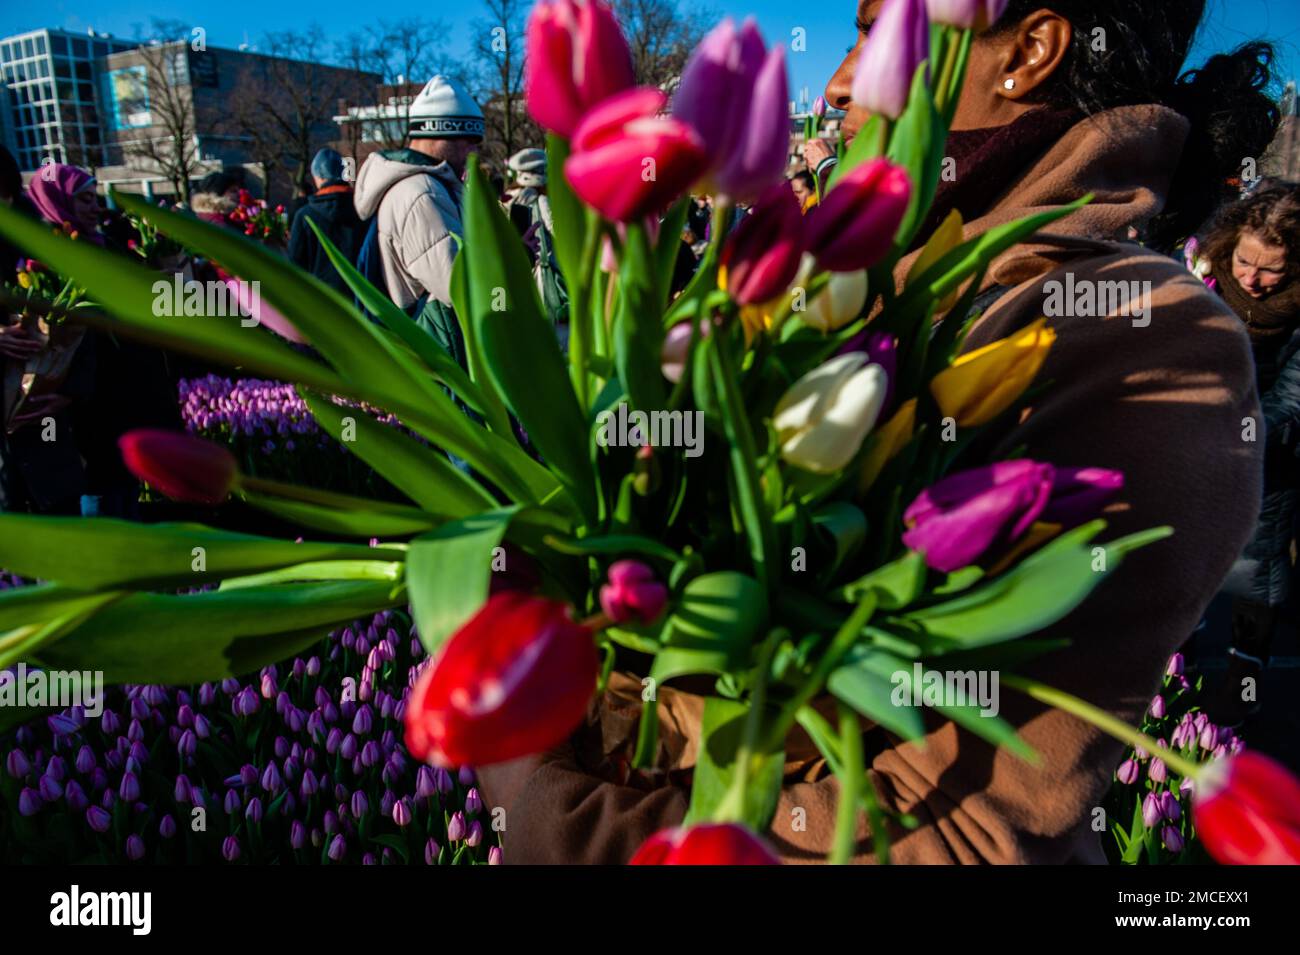 A woman seen walking with a bunch of colorful tulips. Each year on the 3rd Saturday of January, the National Tulip Day is celebrated in Amsterdam. Dutch tulip growers built a huge picking garden with more than 200,000 colorful tulips at the Museumplein in Amsterdam. Visitors are allowed to pick tulips for free. The event was opened by Olympic skating champion, Irene Schouten. Prior to the opening, she christened a new tulip: Tulipa 'Dutch Pearl' as a reference to the world - famous painting 'The girl with a pearl earring' by Johannes Vermeer. (Photo by Ana Fernandez/SOPA Images/Sipa USA) Stock Photo